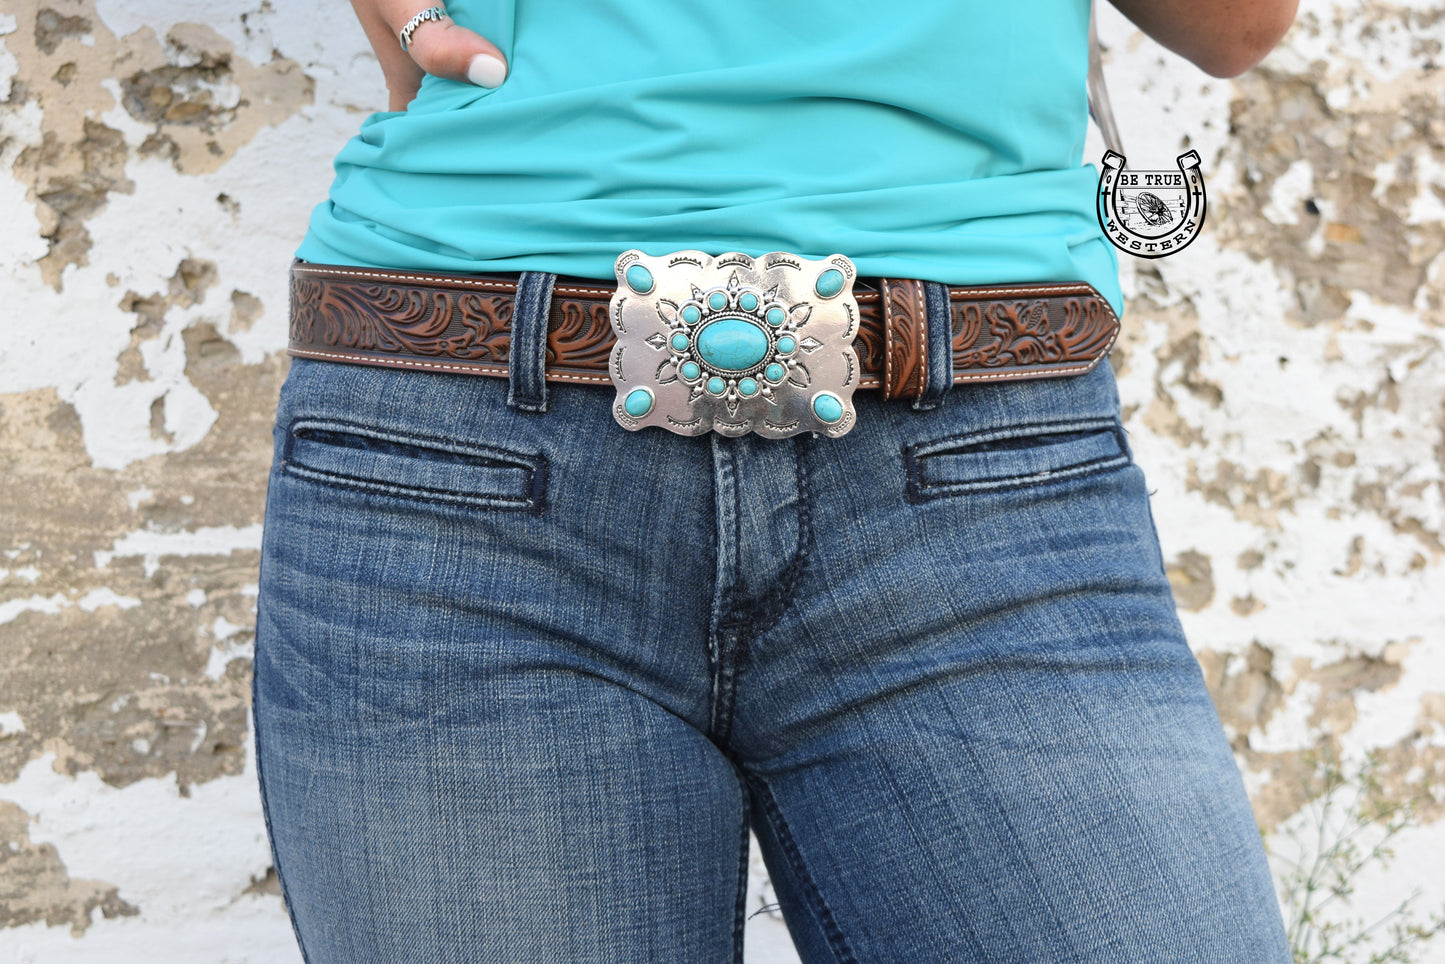 Turquoise Concho Belt buckle